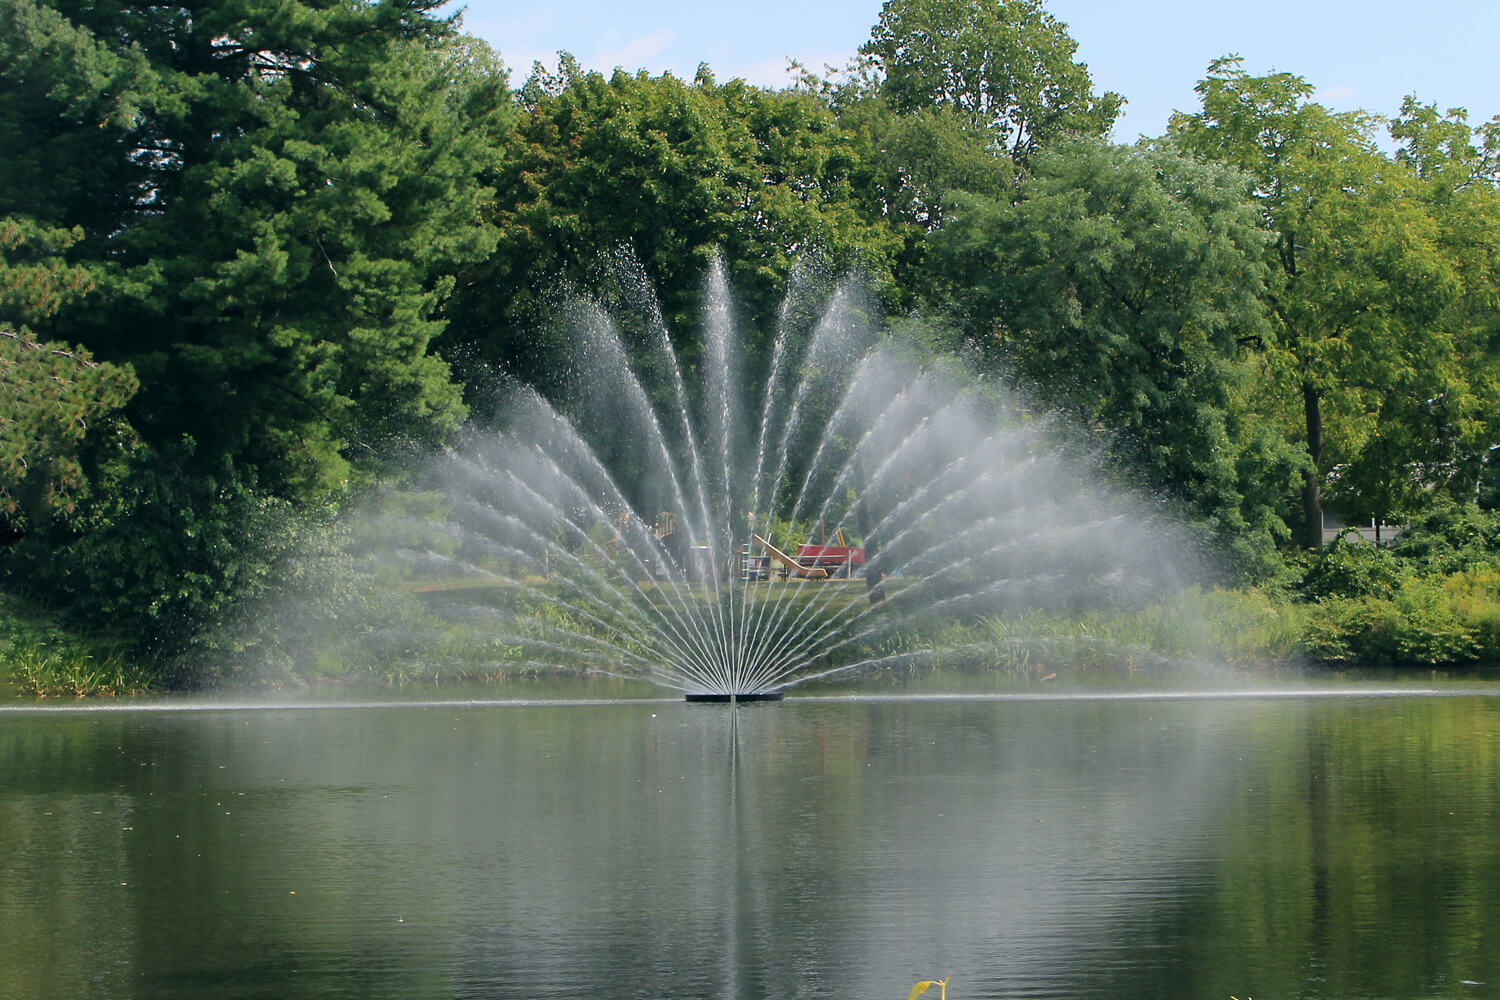 One of Otterbine's Aries Giant Aerating Fountains